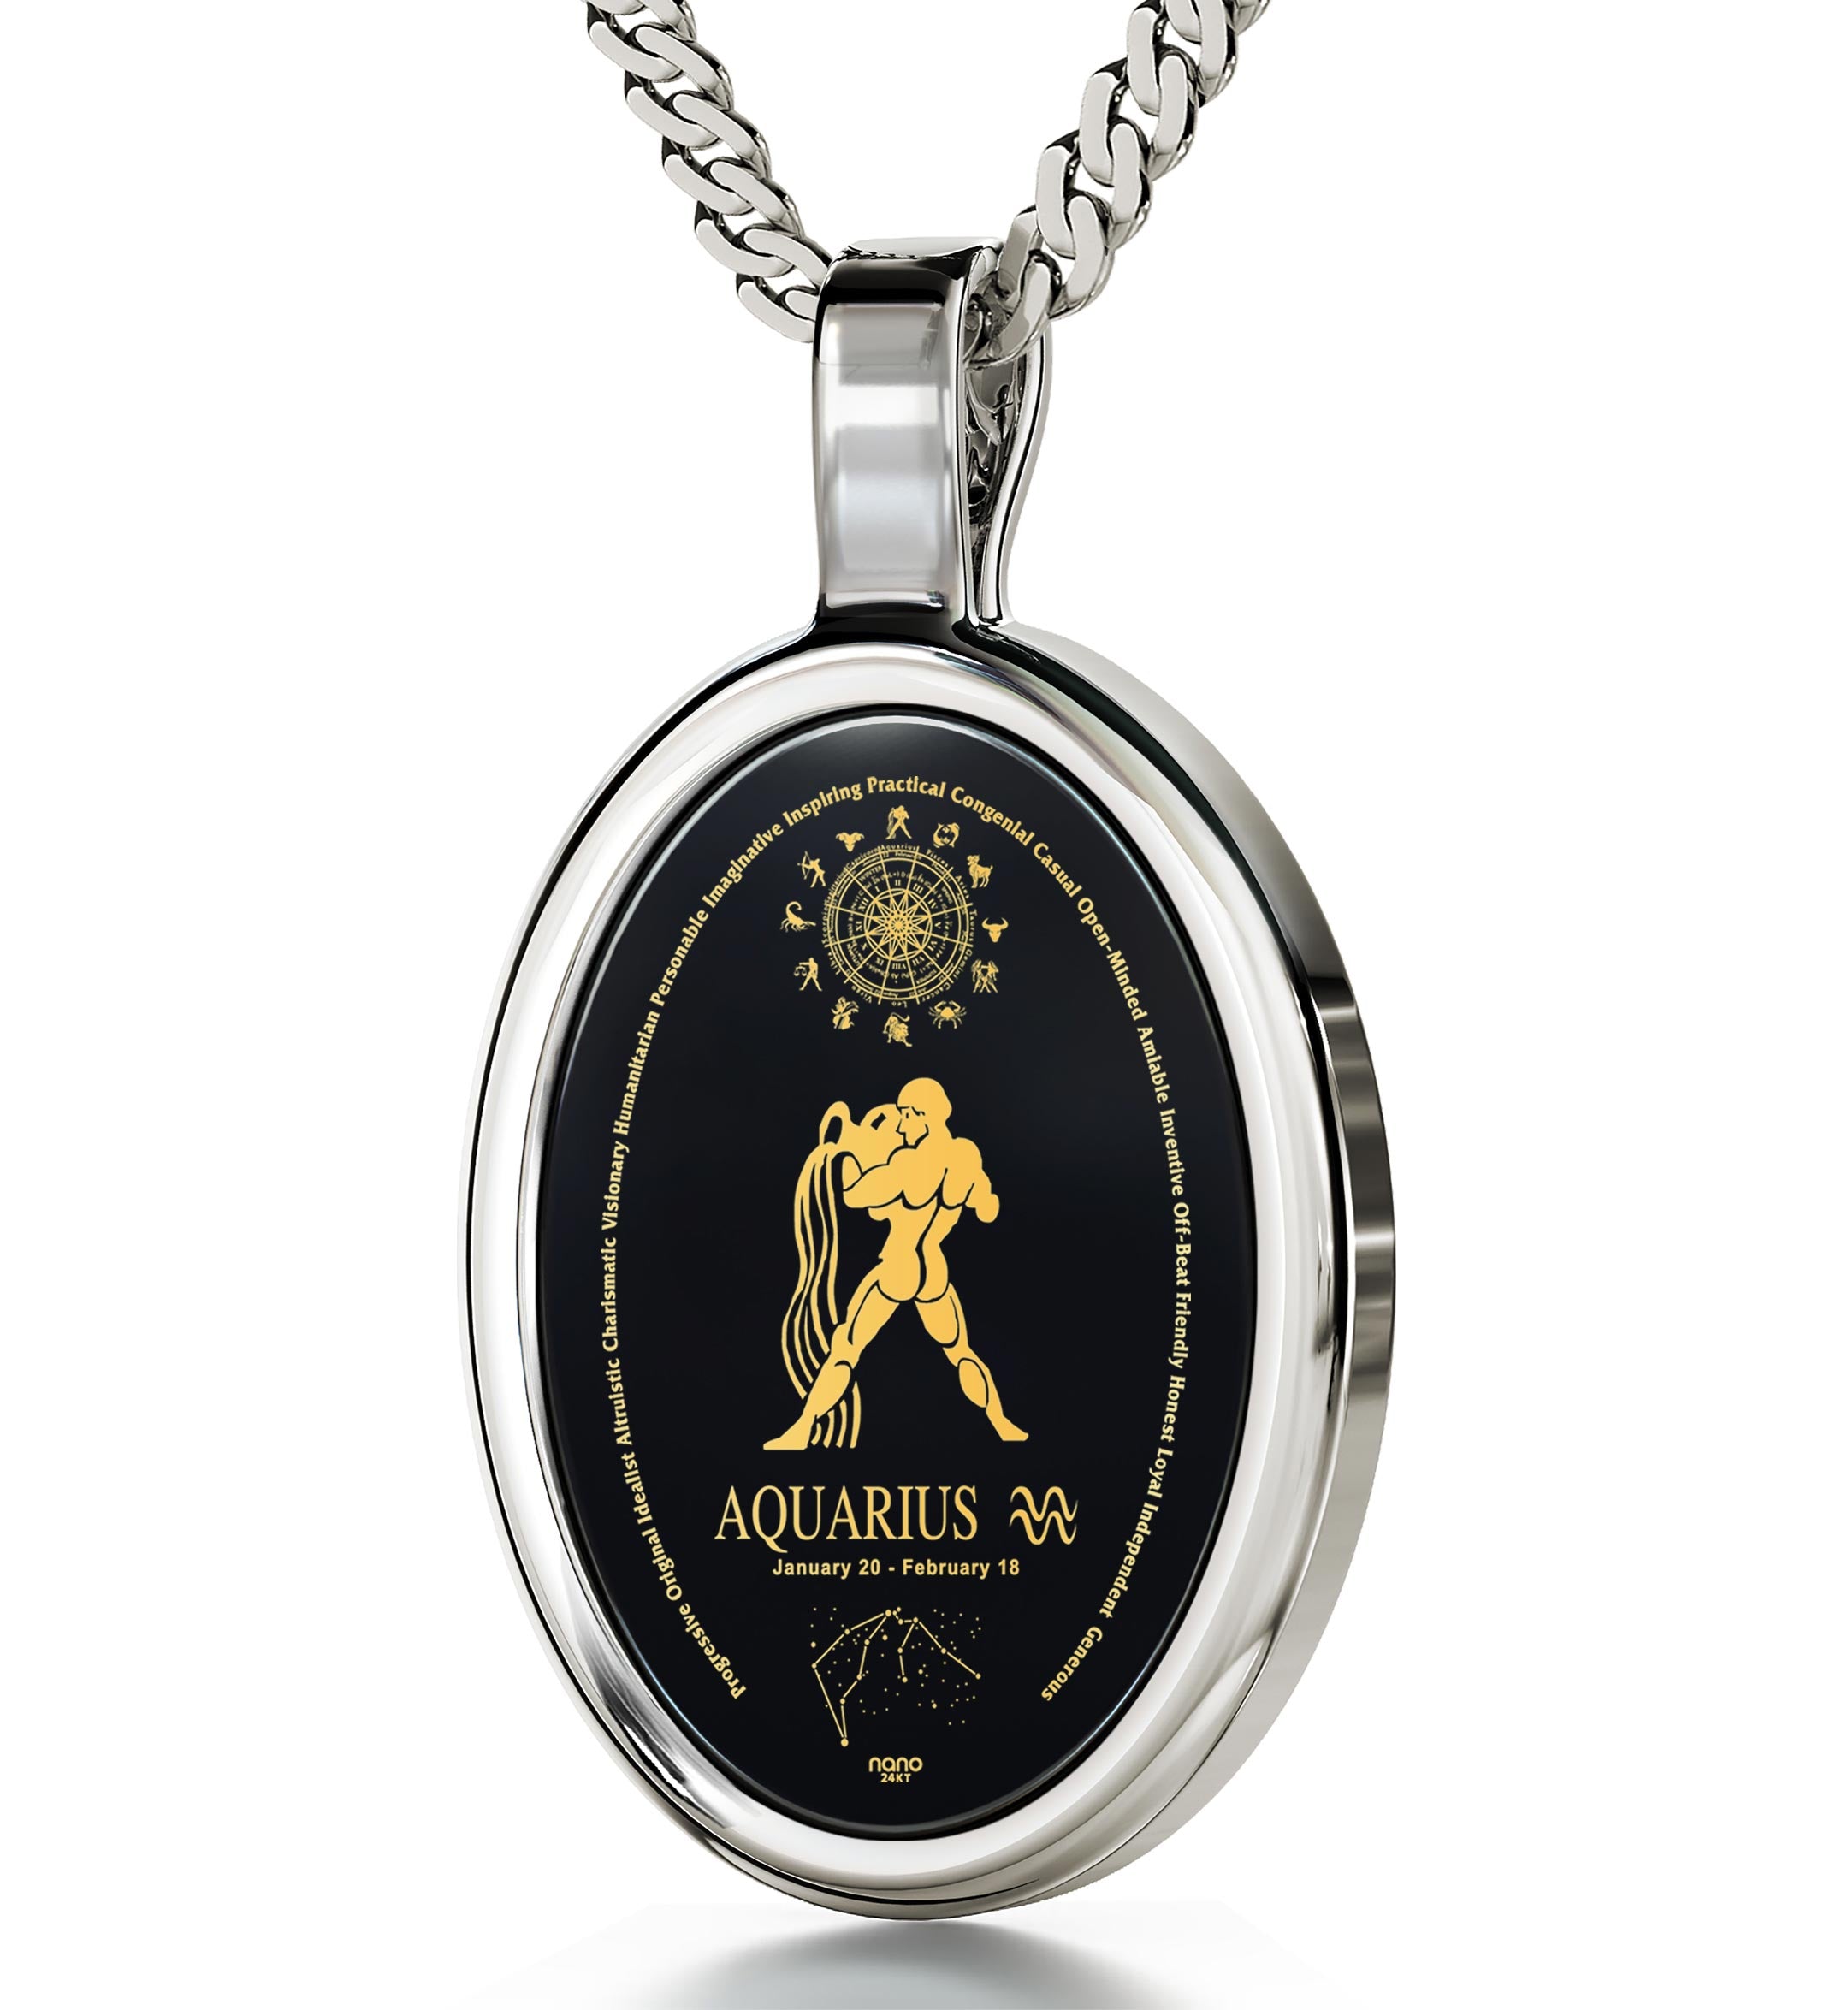 Inscribed NanoStyle Gold Jewelry Necklace Unique | Zodiac Gift - Only 24k World\'s Aquarius